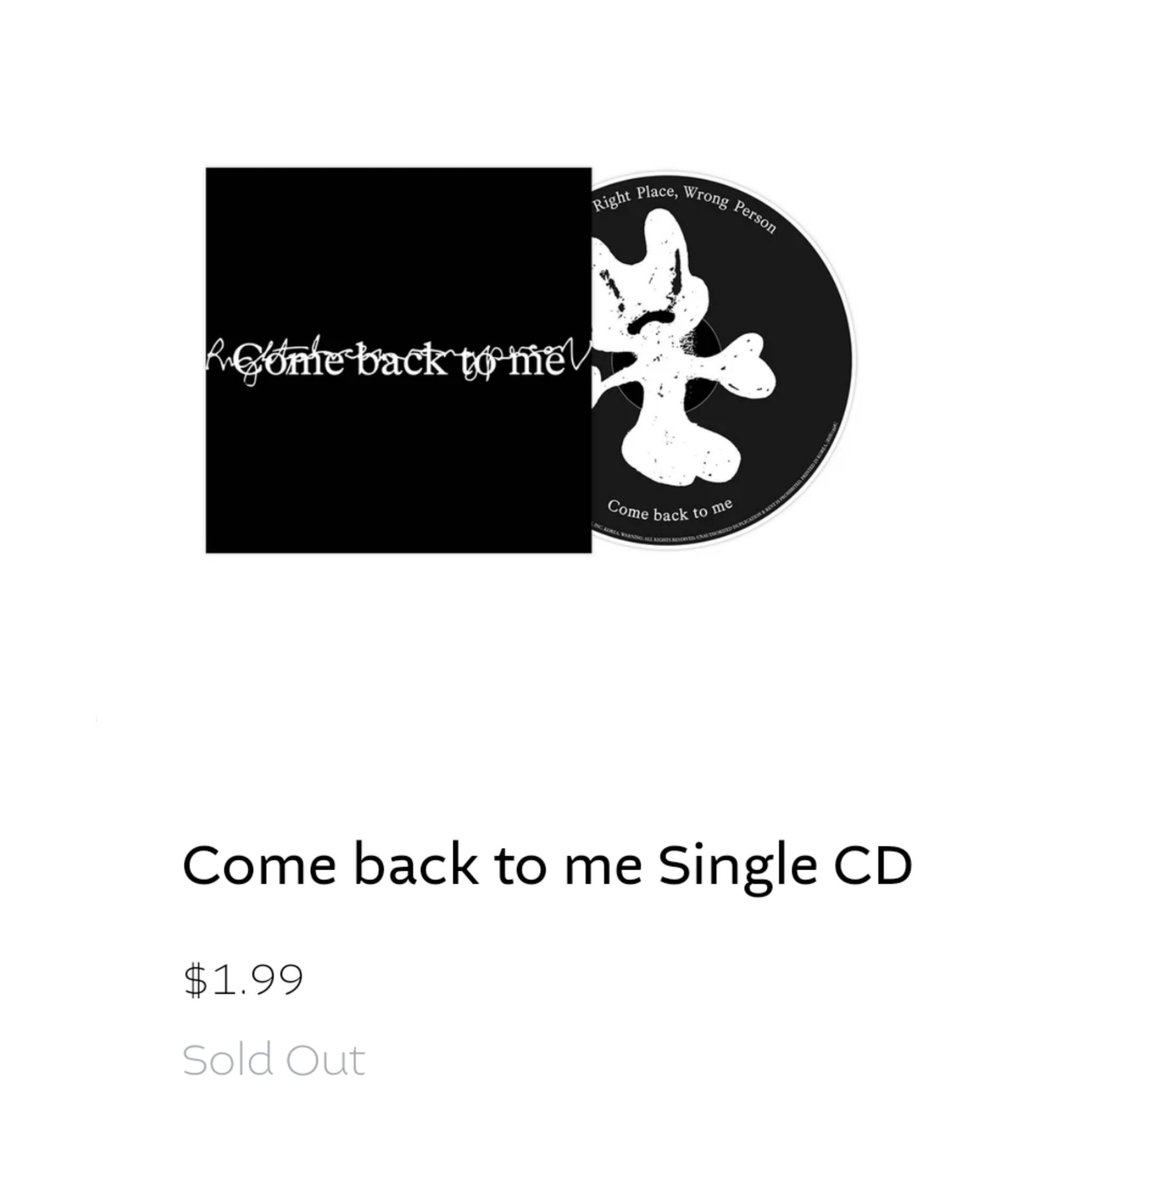 ⚡Second Batch of 'Come back to me' CDs has been SOLD OUT!

+11k CDs = 11 Points secured 🔥